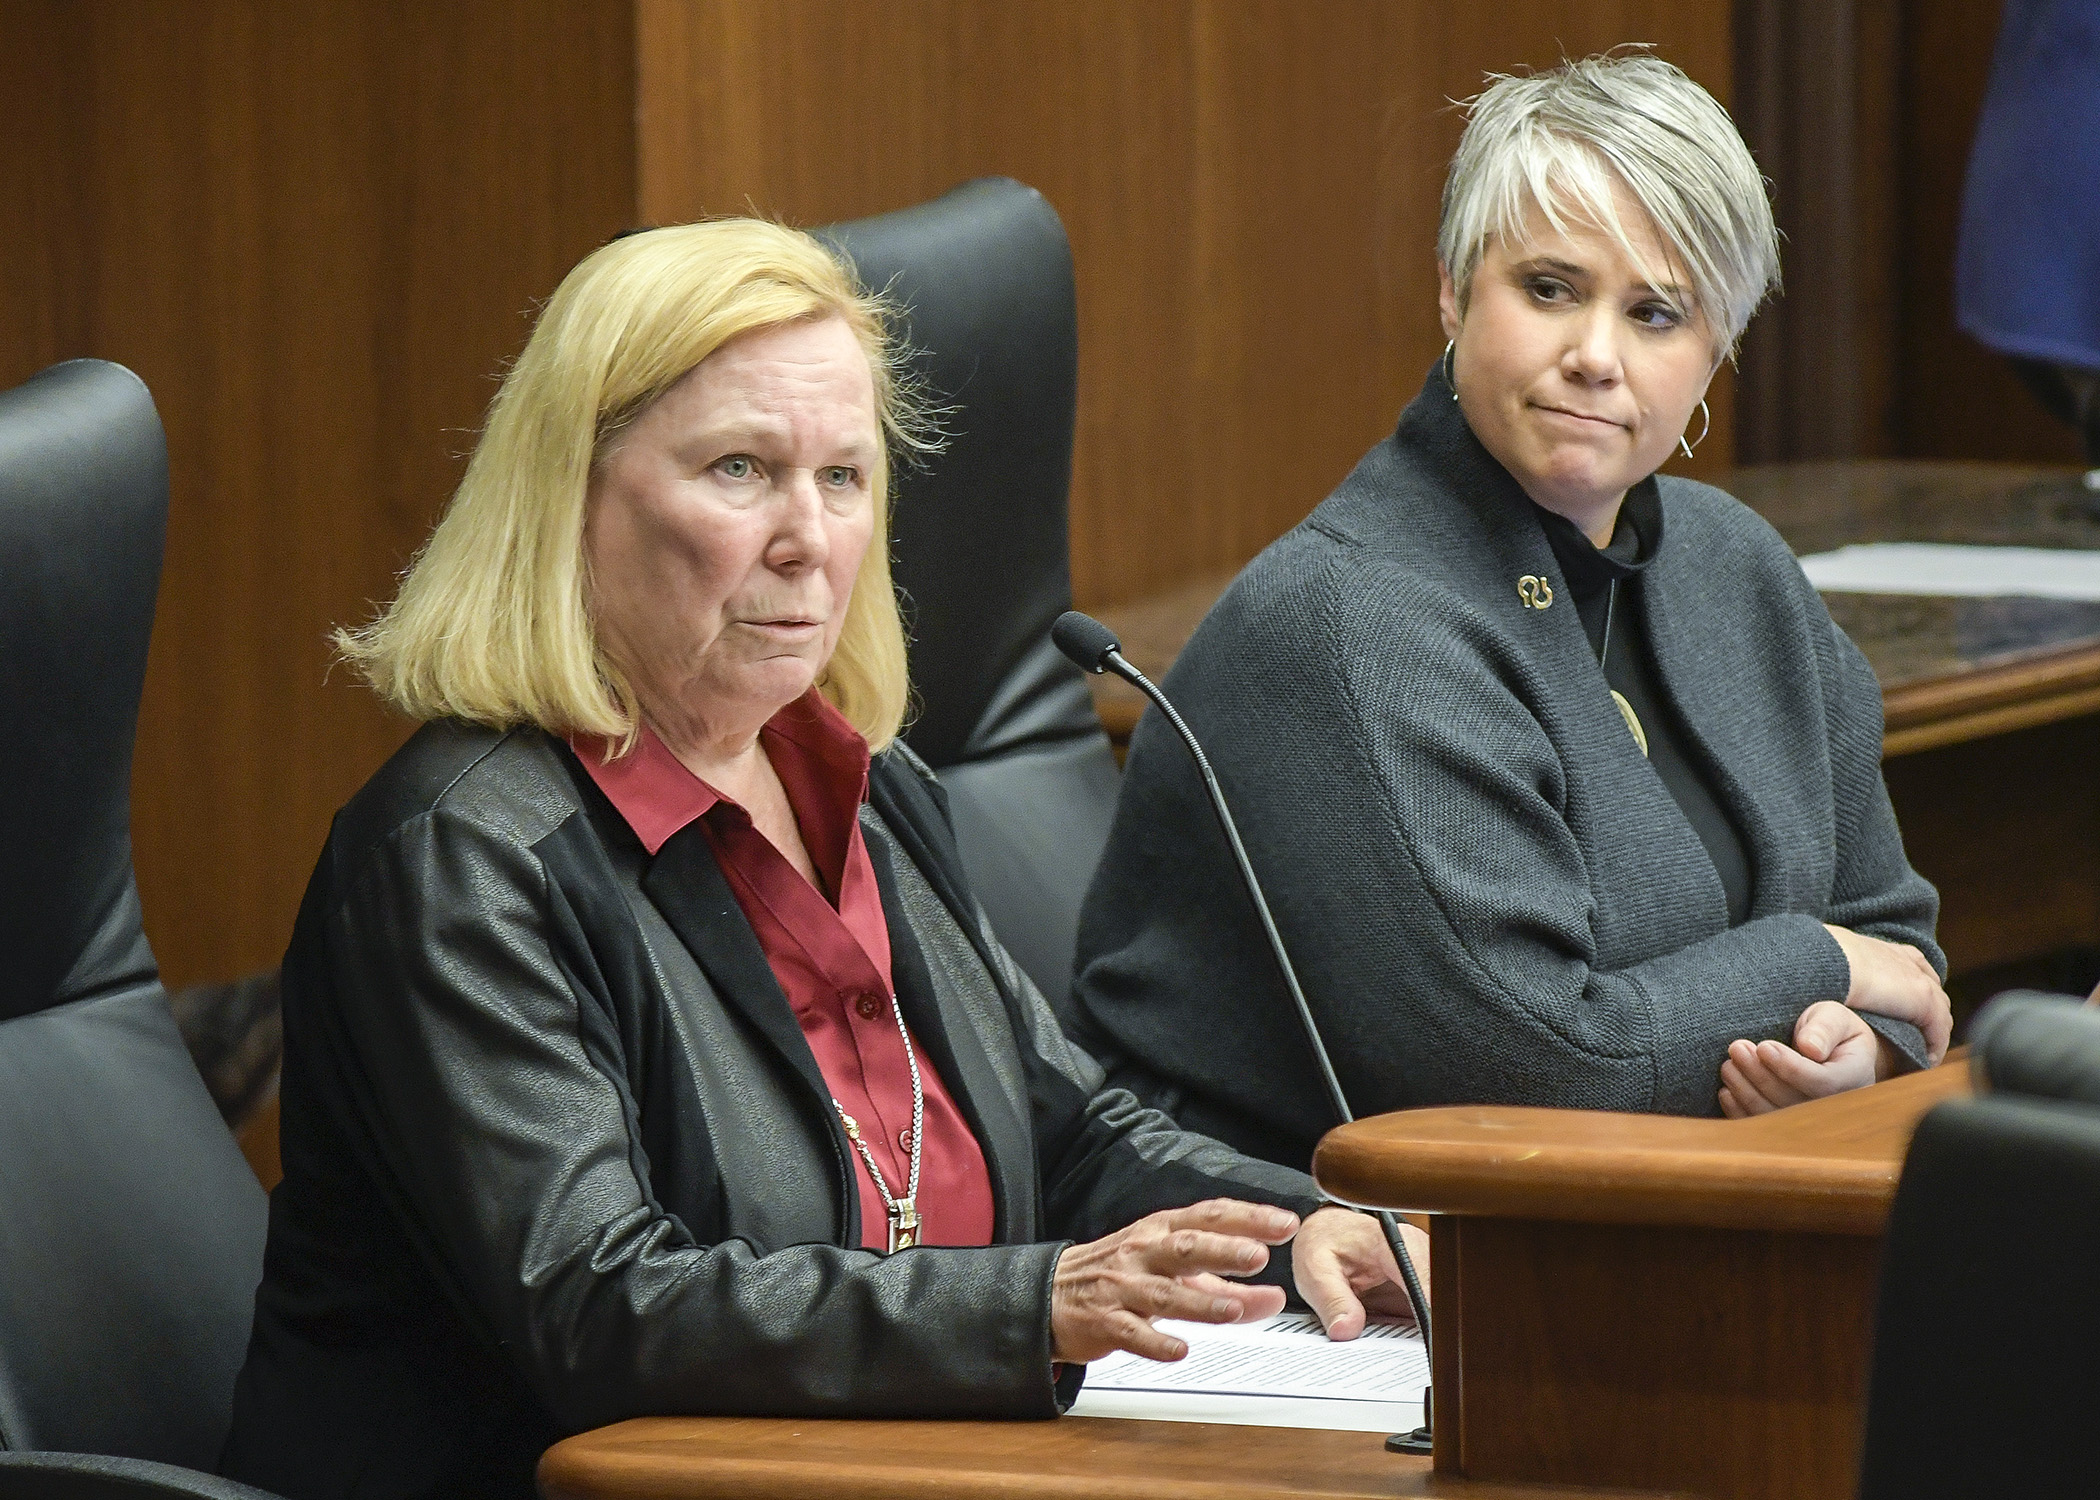 Kris Sundberg, president of Elder Voice Family Advocates, and Beth McMullen, vice president of government affairs at Alzheimer’s Association Minnesota-North Dakota, testify before the House Health and Human Services Policy Committee. Photo by Andrew VonBank